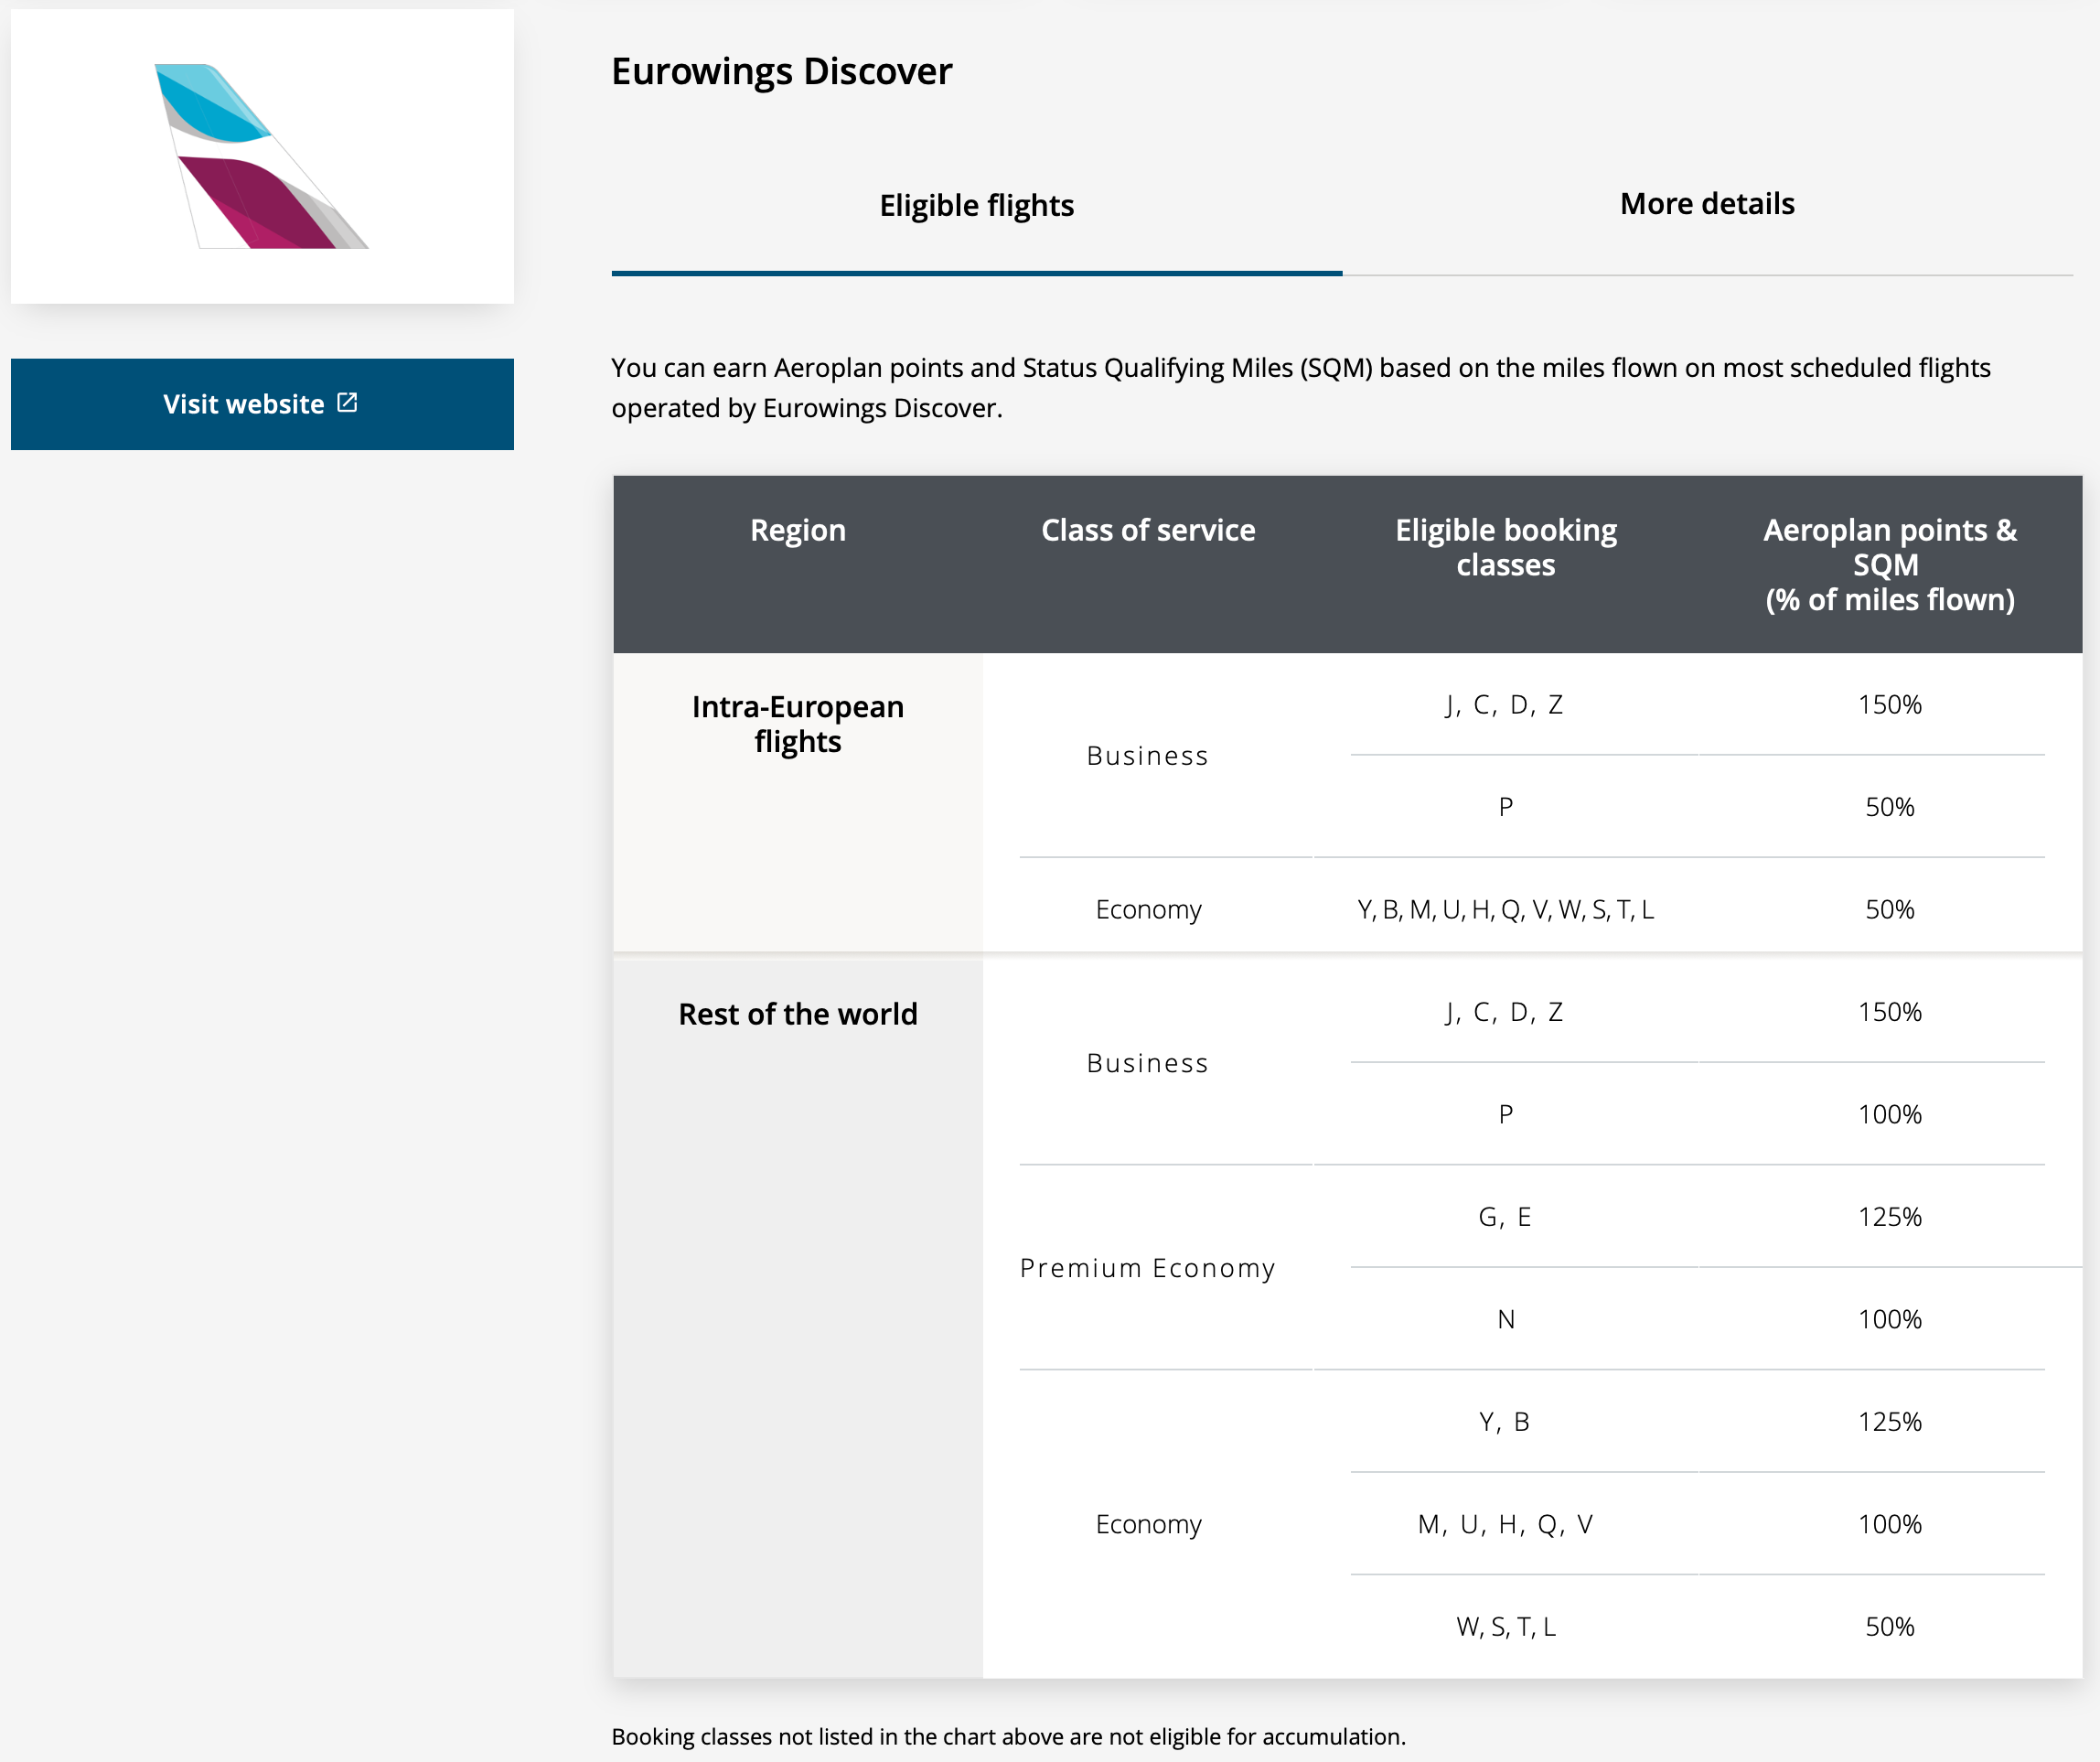 Aeroplan earning chart for Eurowings Discover flights